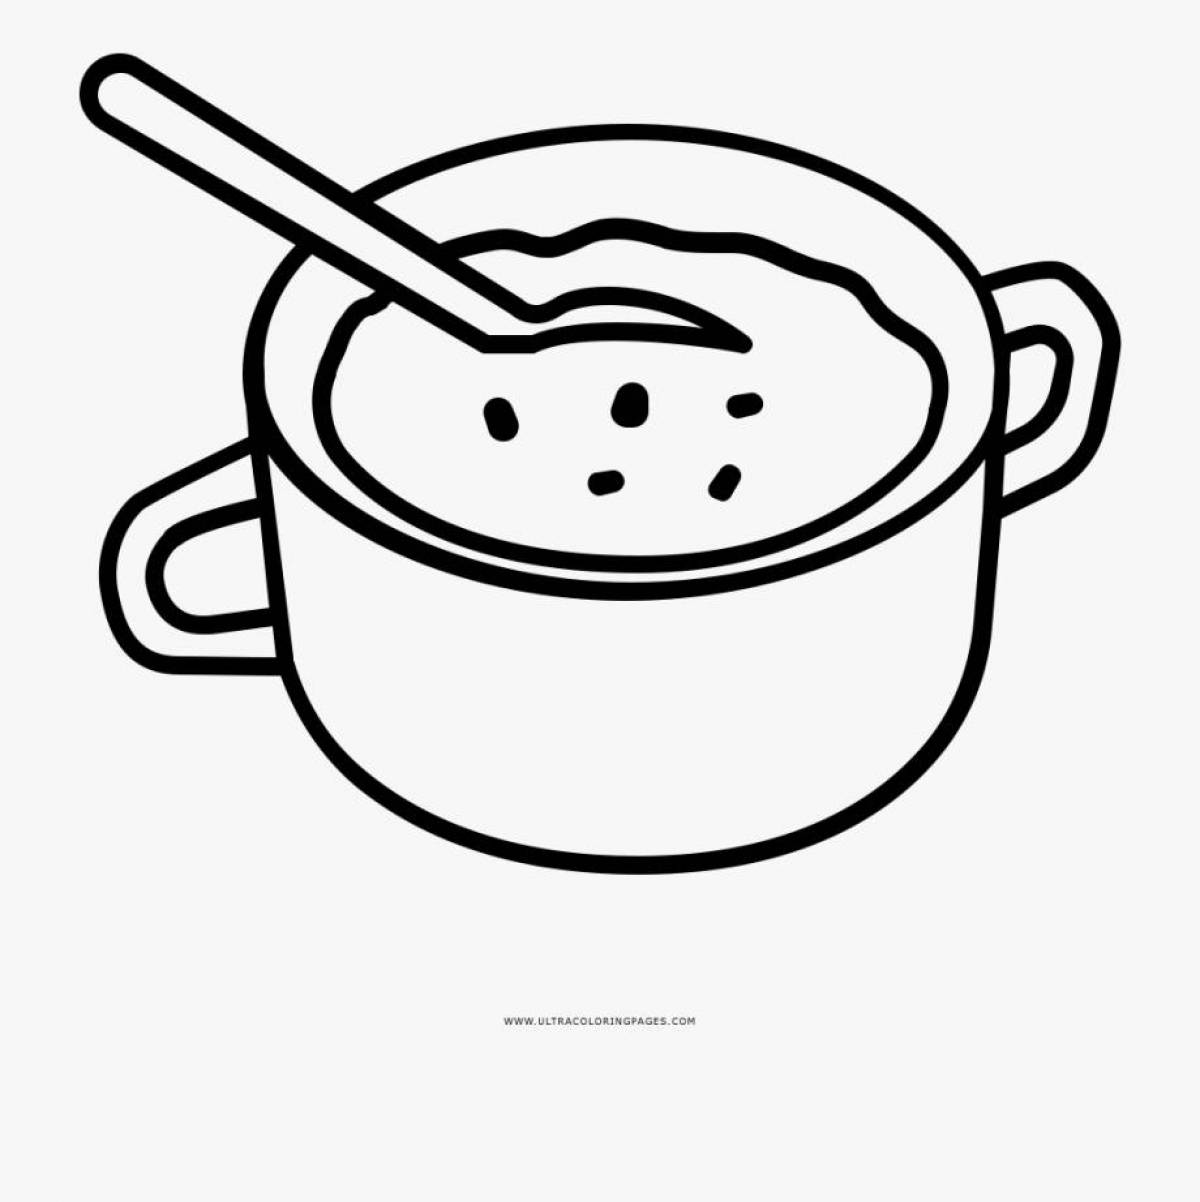 Inviting soup coloring pages